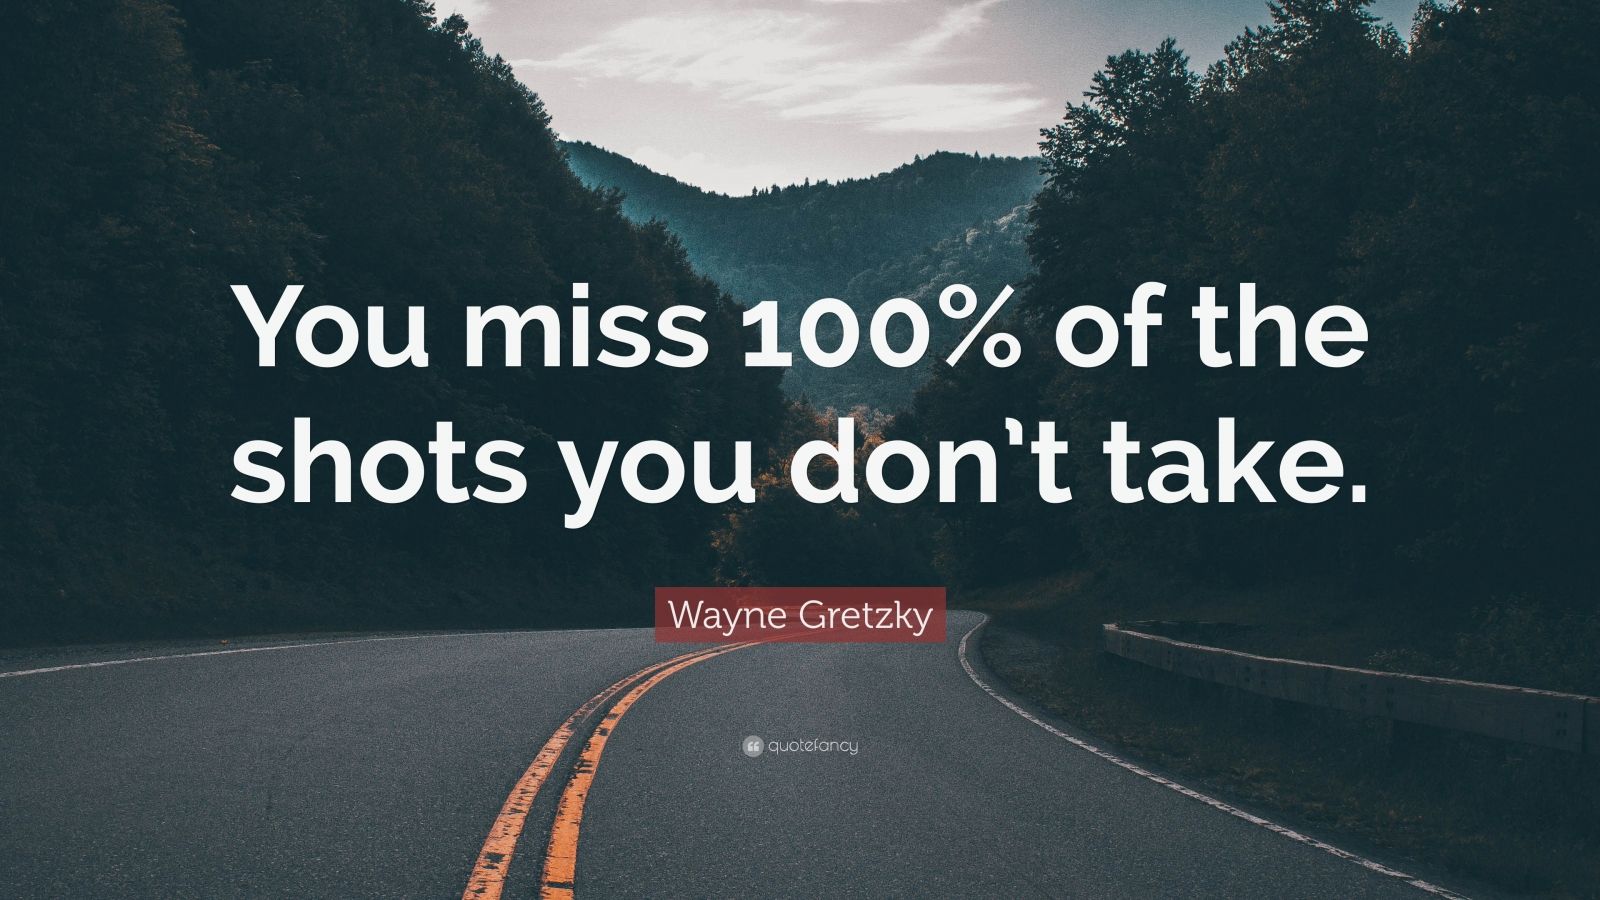 4676646 Wayne Gretzky Quote You miss 100 of the shots you don t take